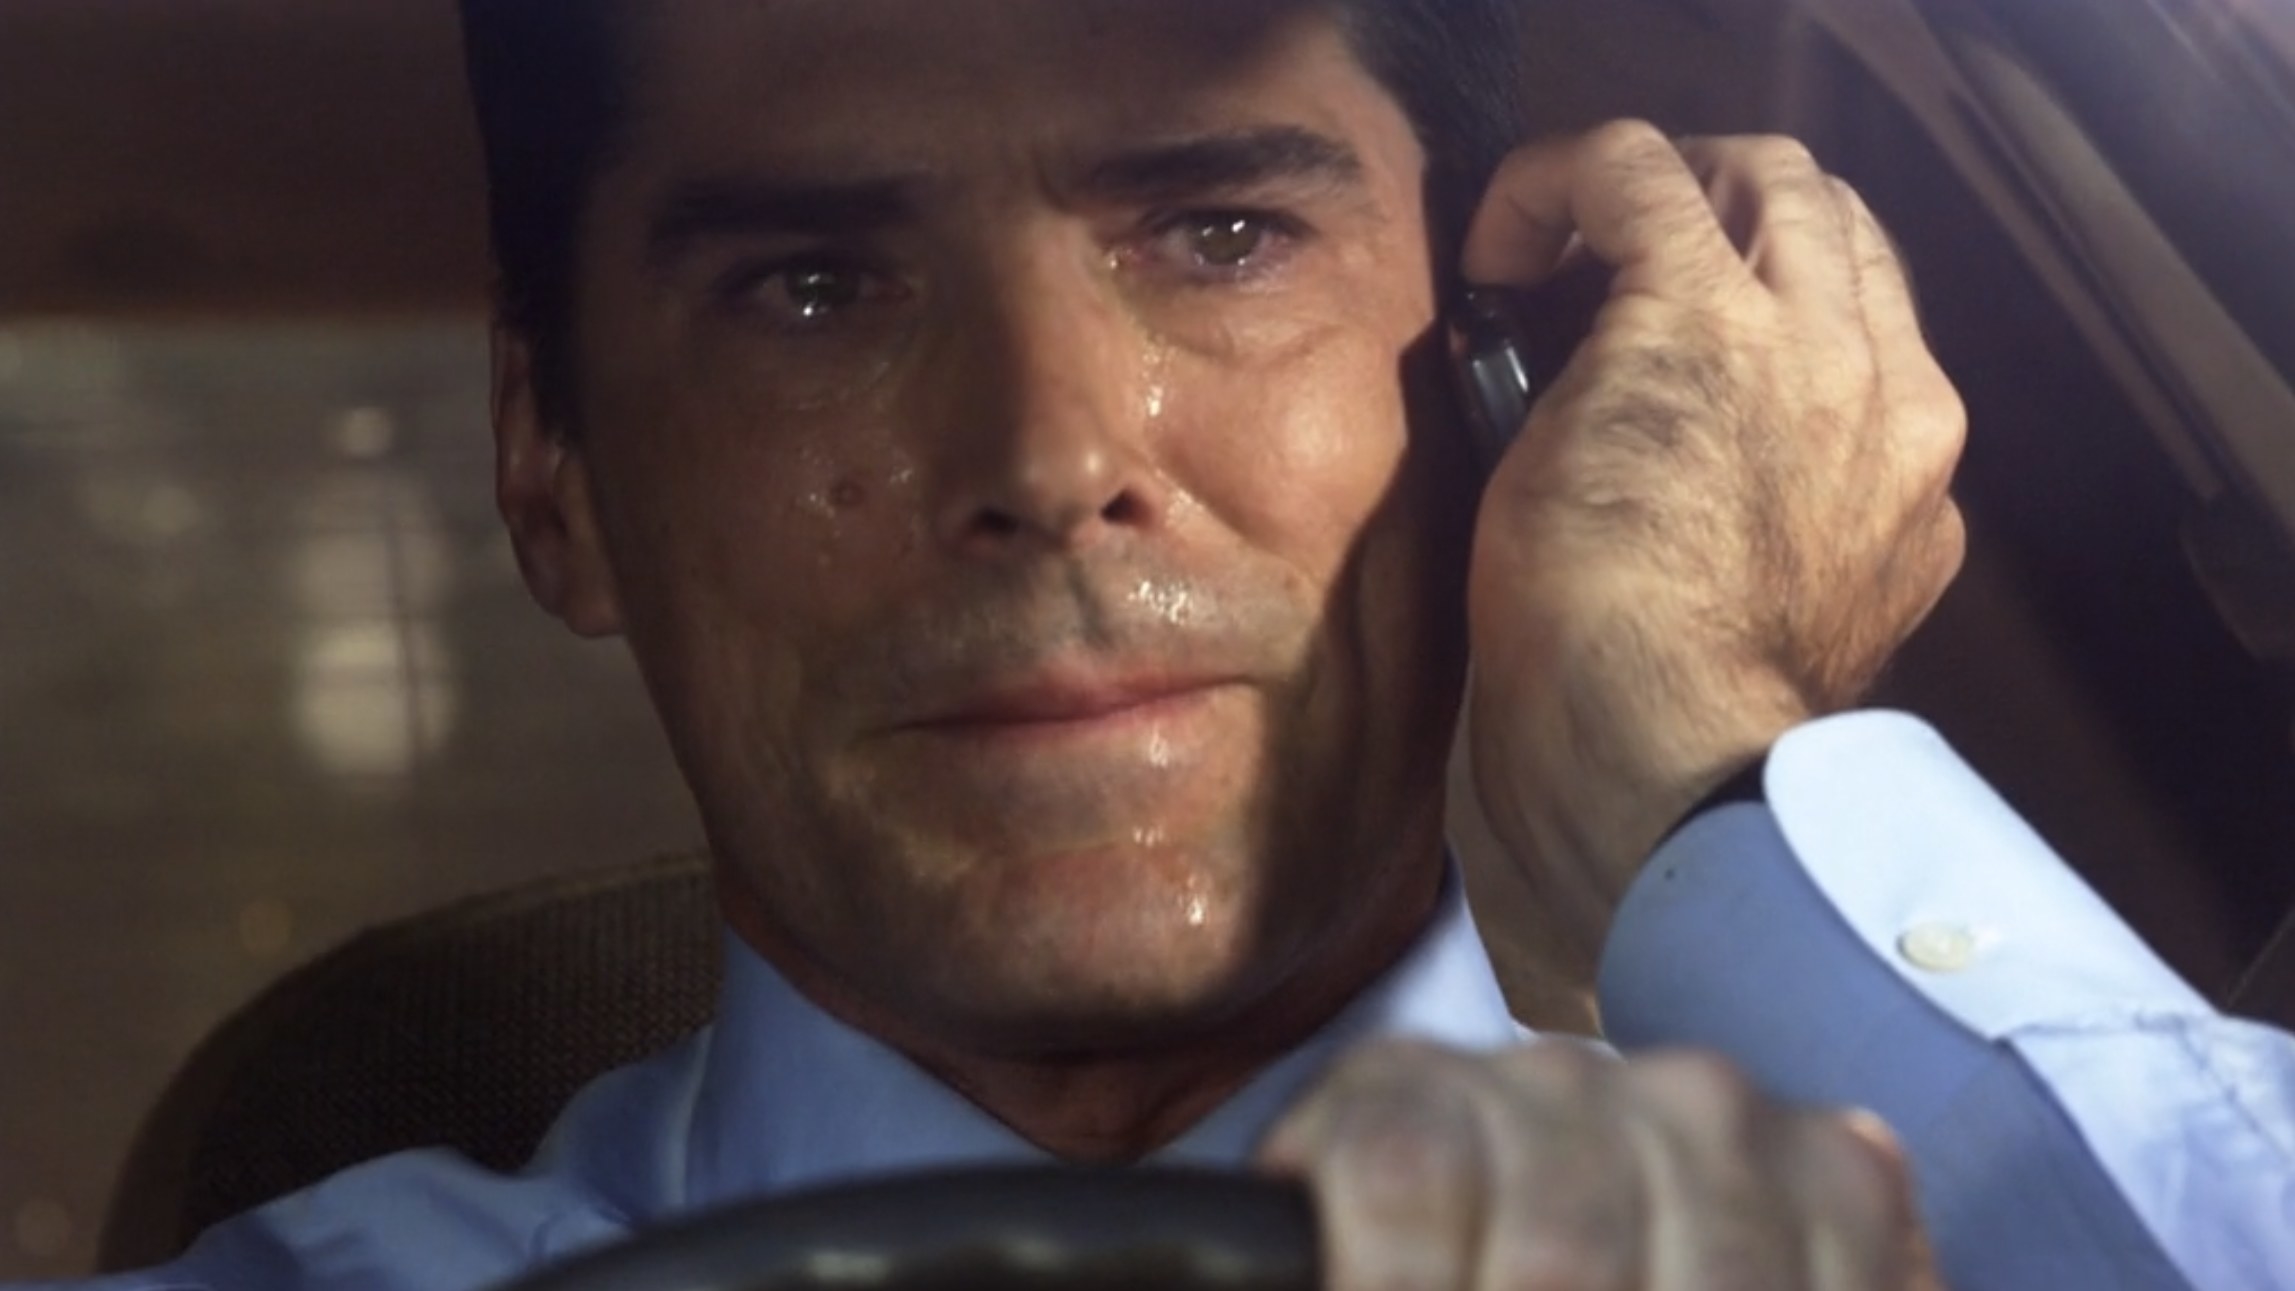 hotch crying on the phone in criminal minds